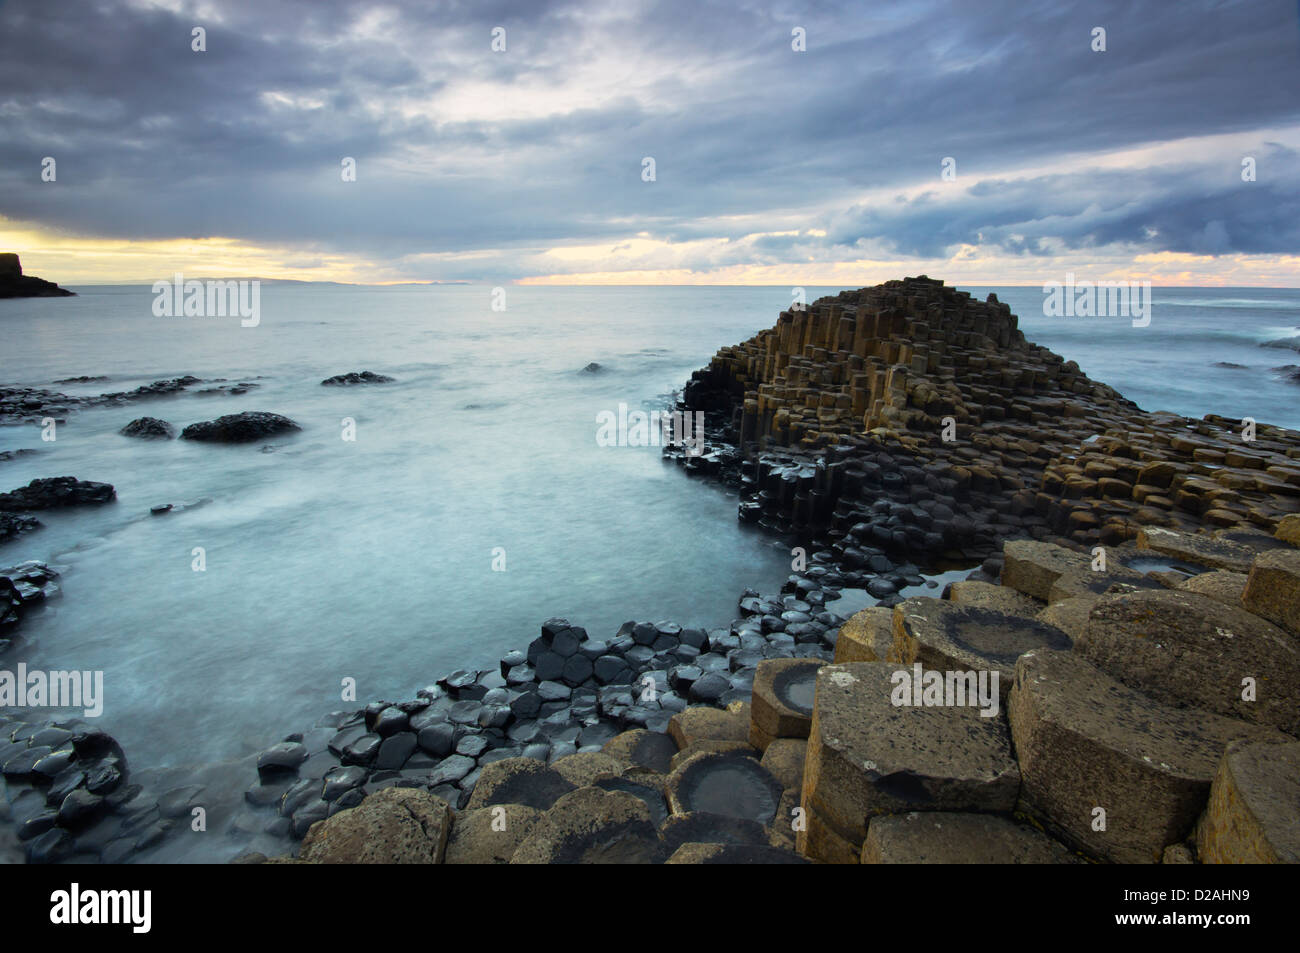 Calm waters at sunset over the famous Giant's Causeway UNESCO world heritage site in Northern Ireland. Stock Photo